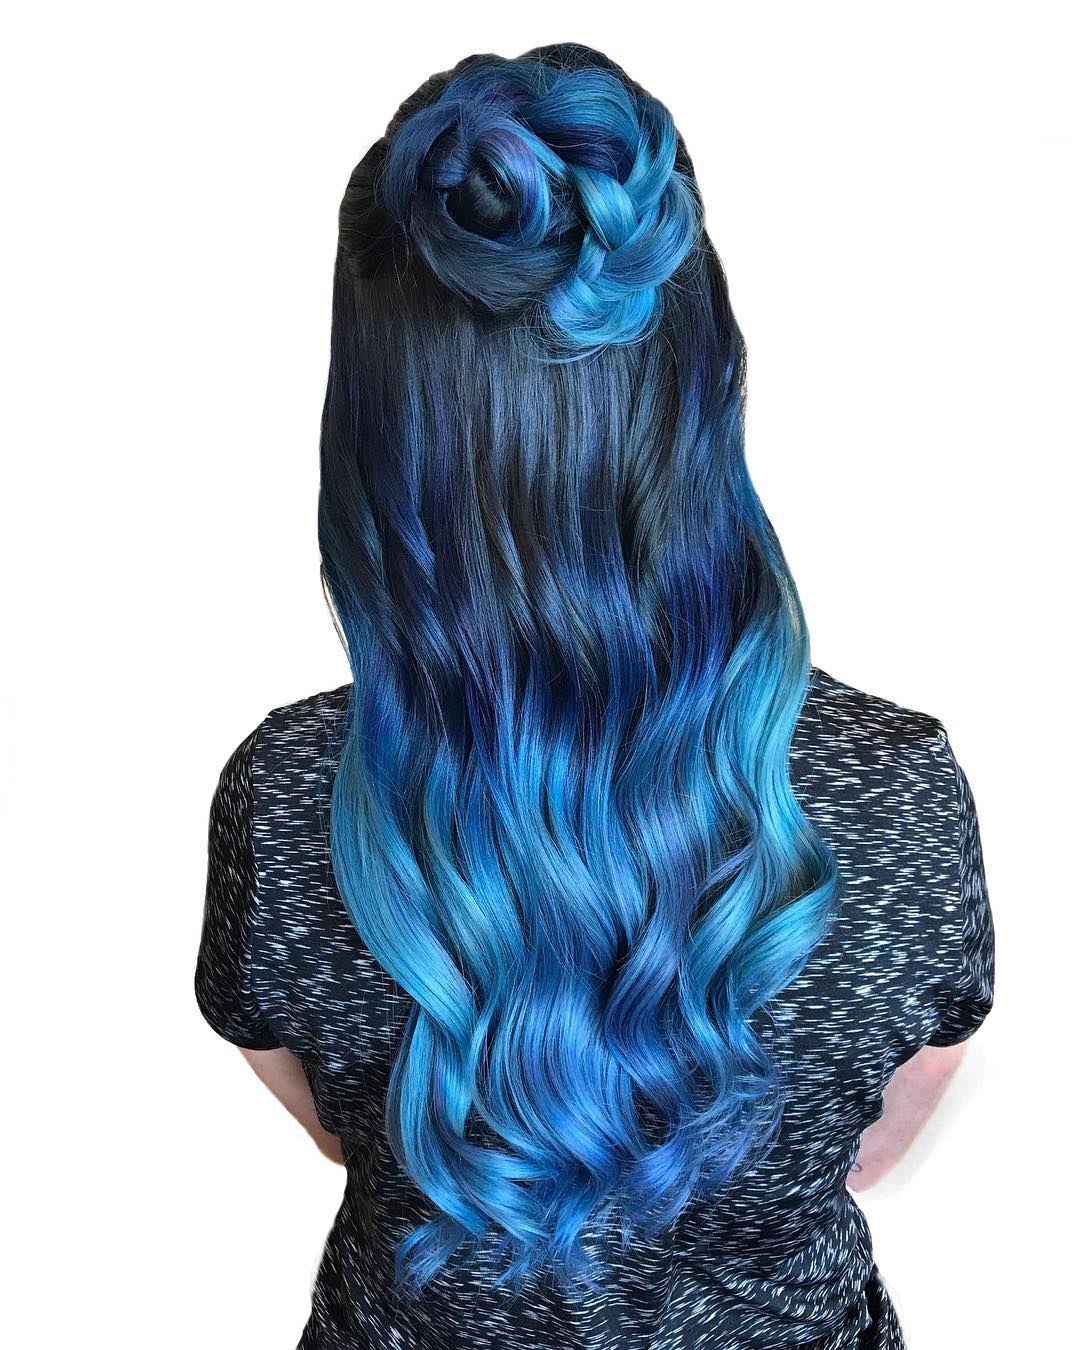 Black to Blue ombre with Braided Top Knot